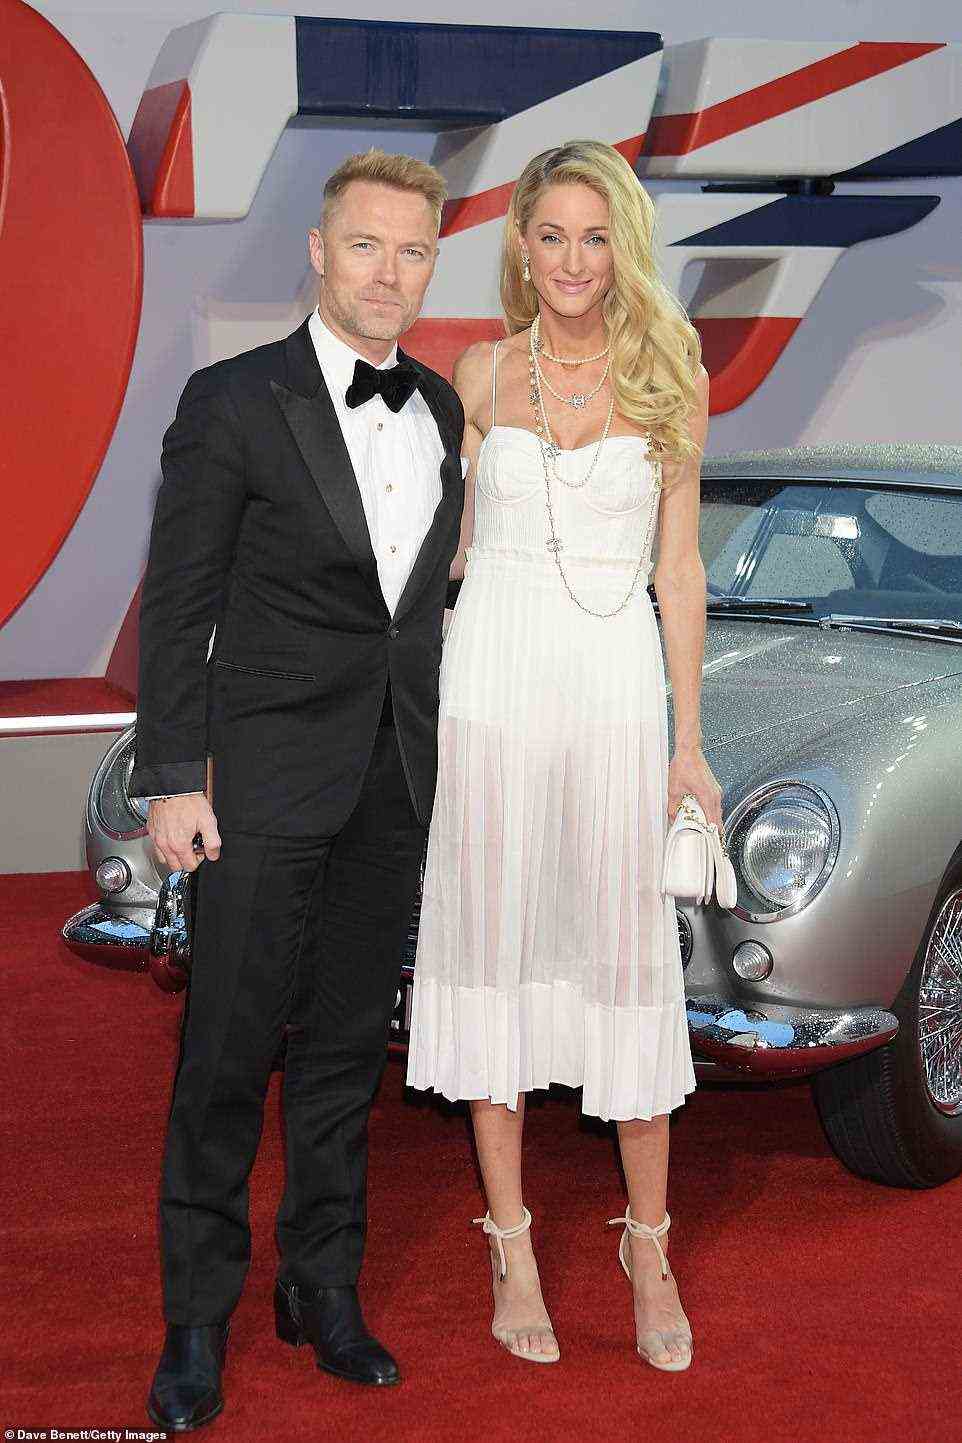 Date night: Ronan Keating and his wife Storm enjoyed a glamourous date night together at the world premiere